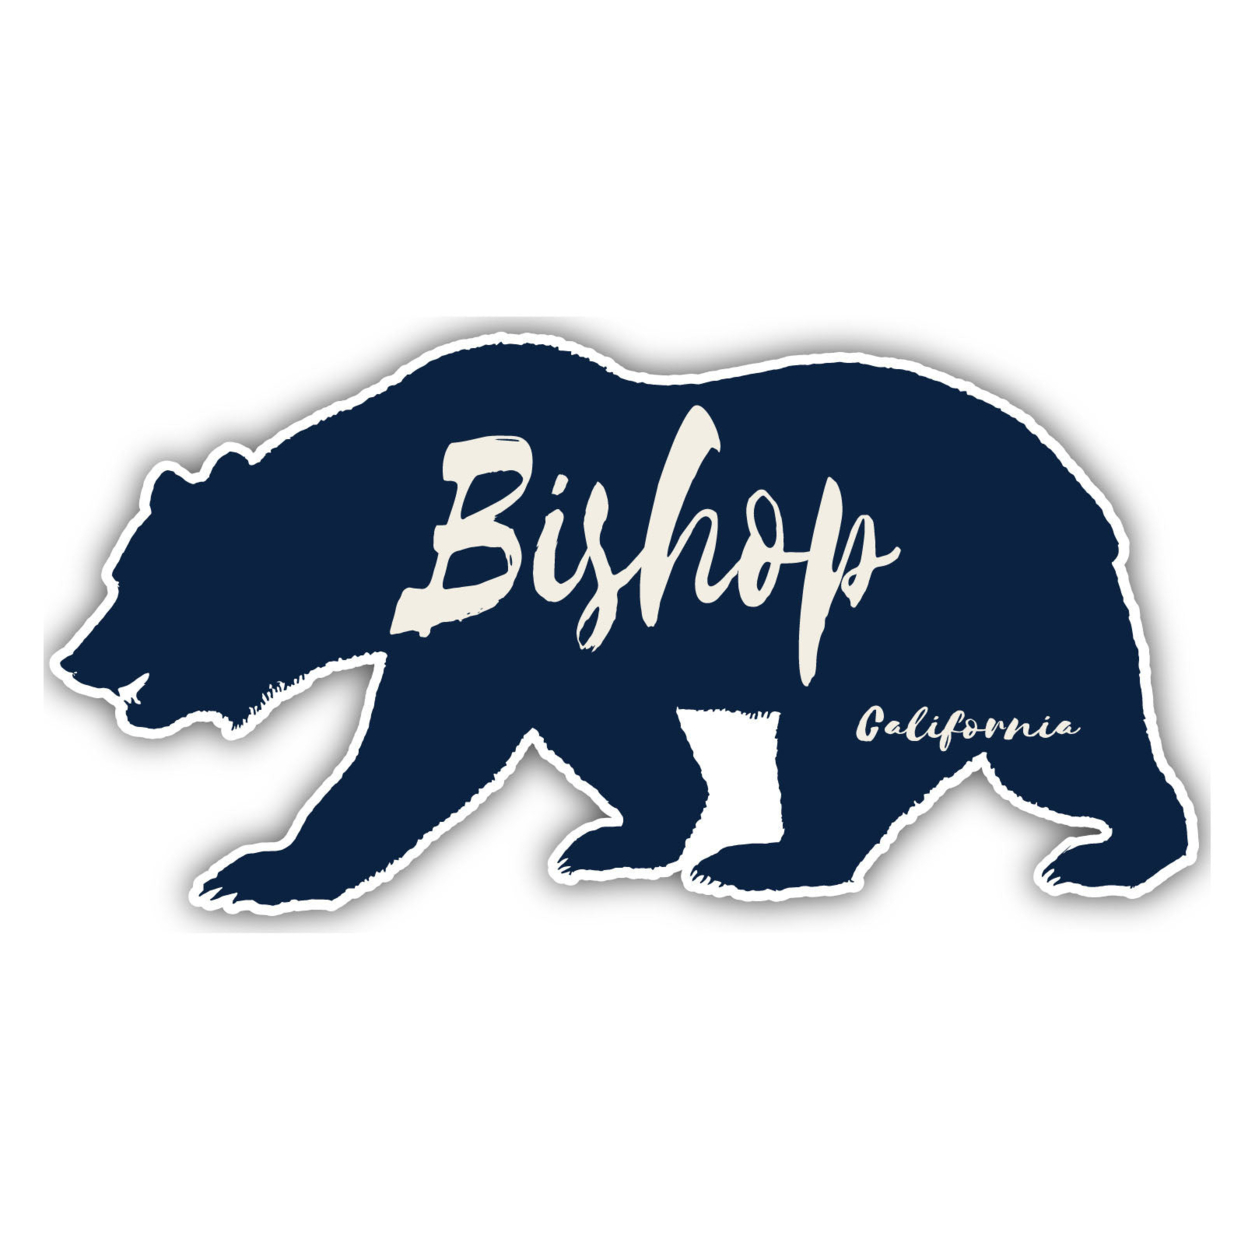 Bishop California Souvenir Decorative Stickers (Choose Theme And Size) - 4-Pack, 4-Inch, Tent